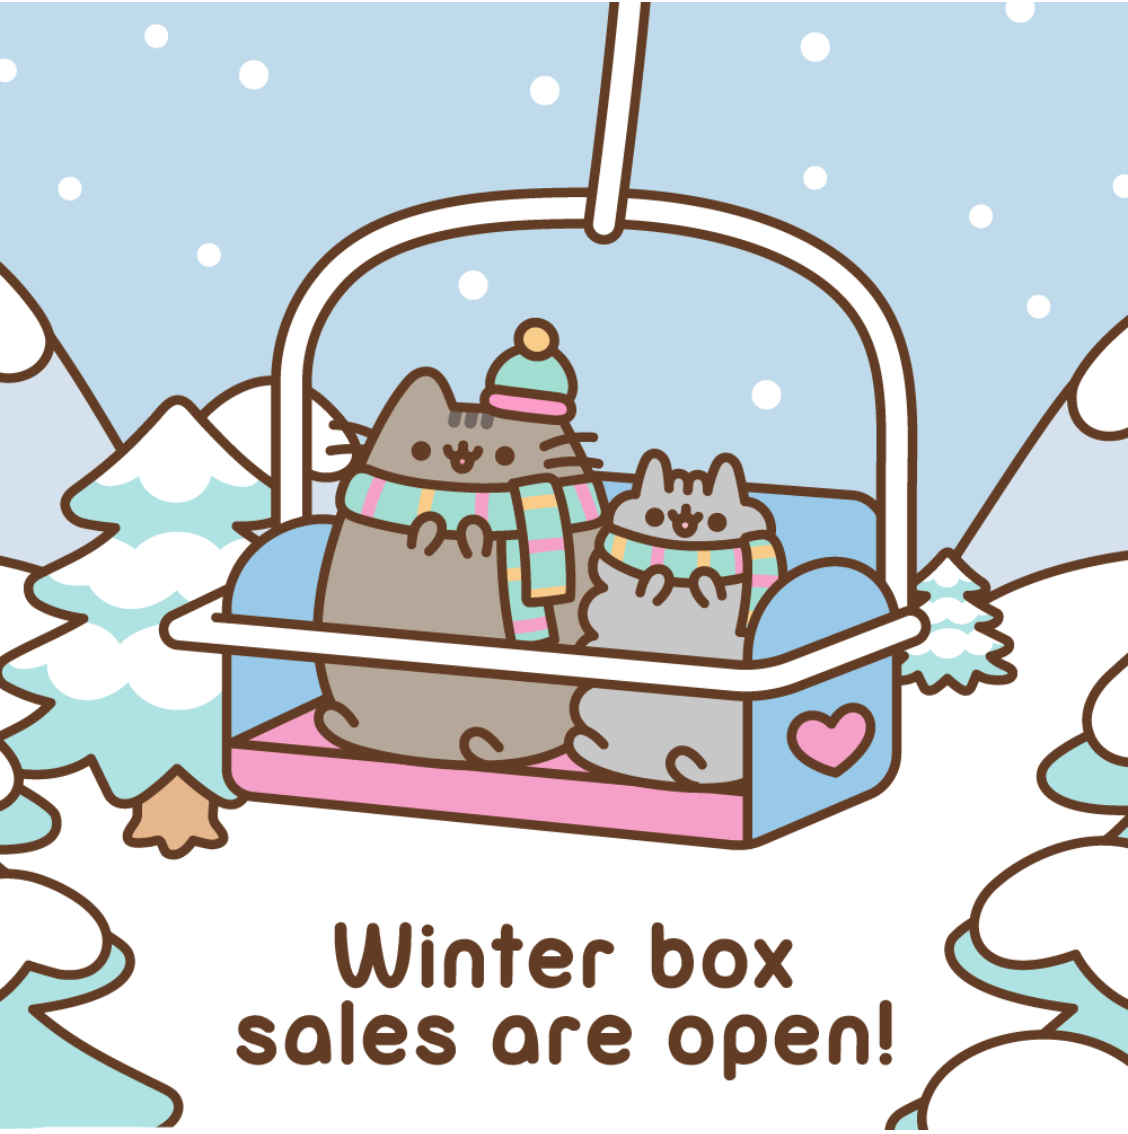 Pusheen Box Subscriptions Are Open! Winter 2018 Box Time!